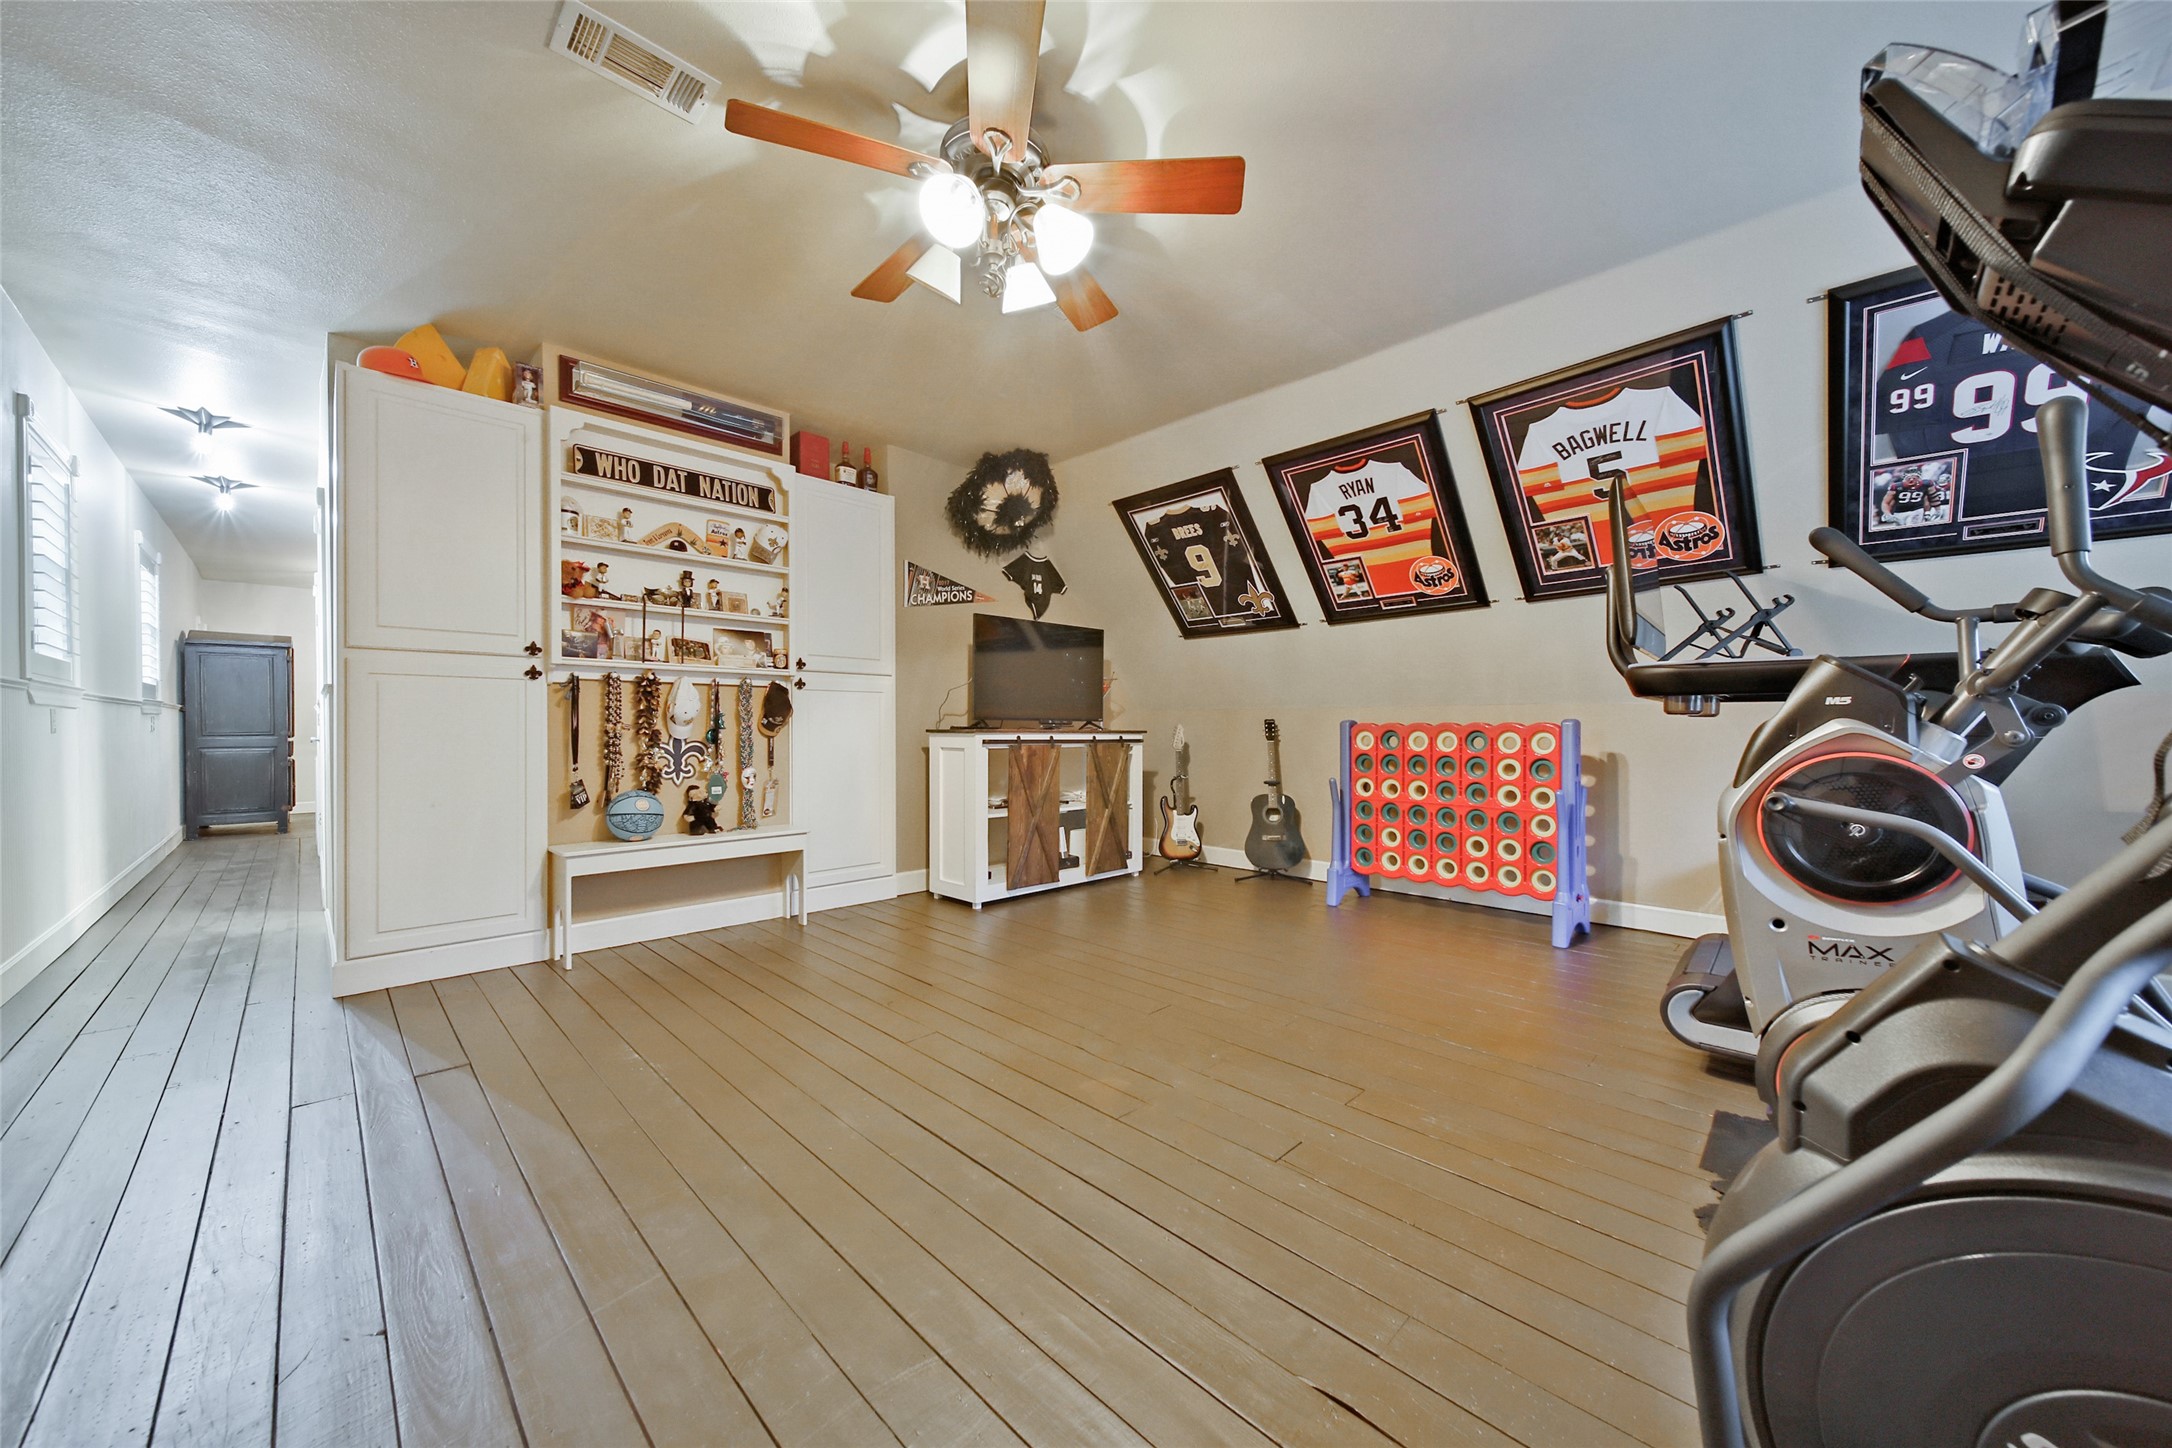 Another view of this spacious gameroom with large built-in storage